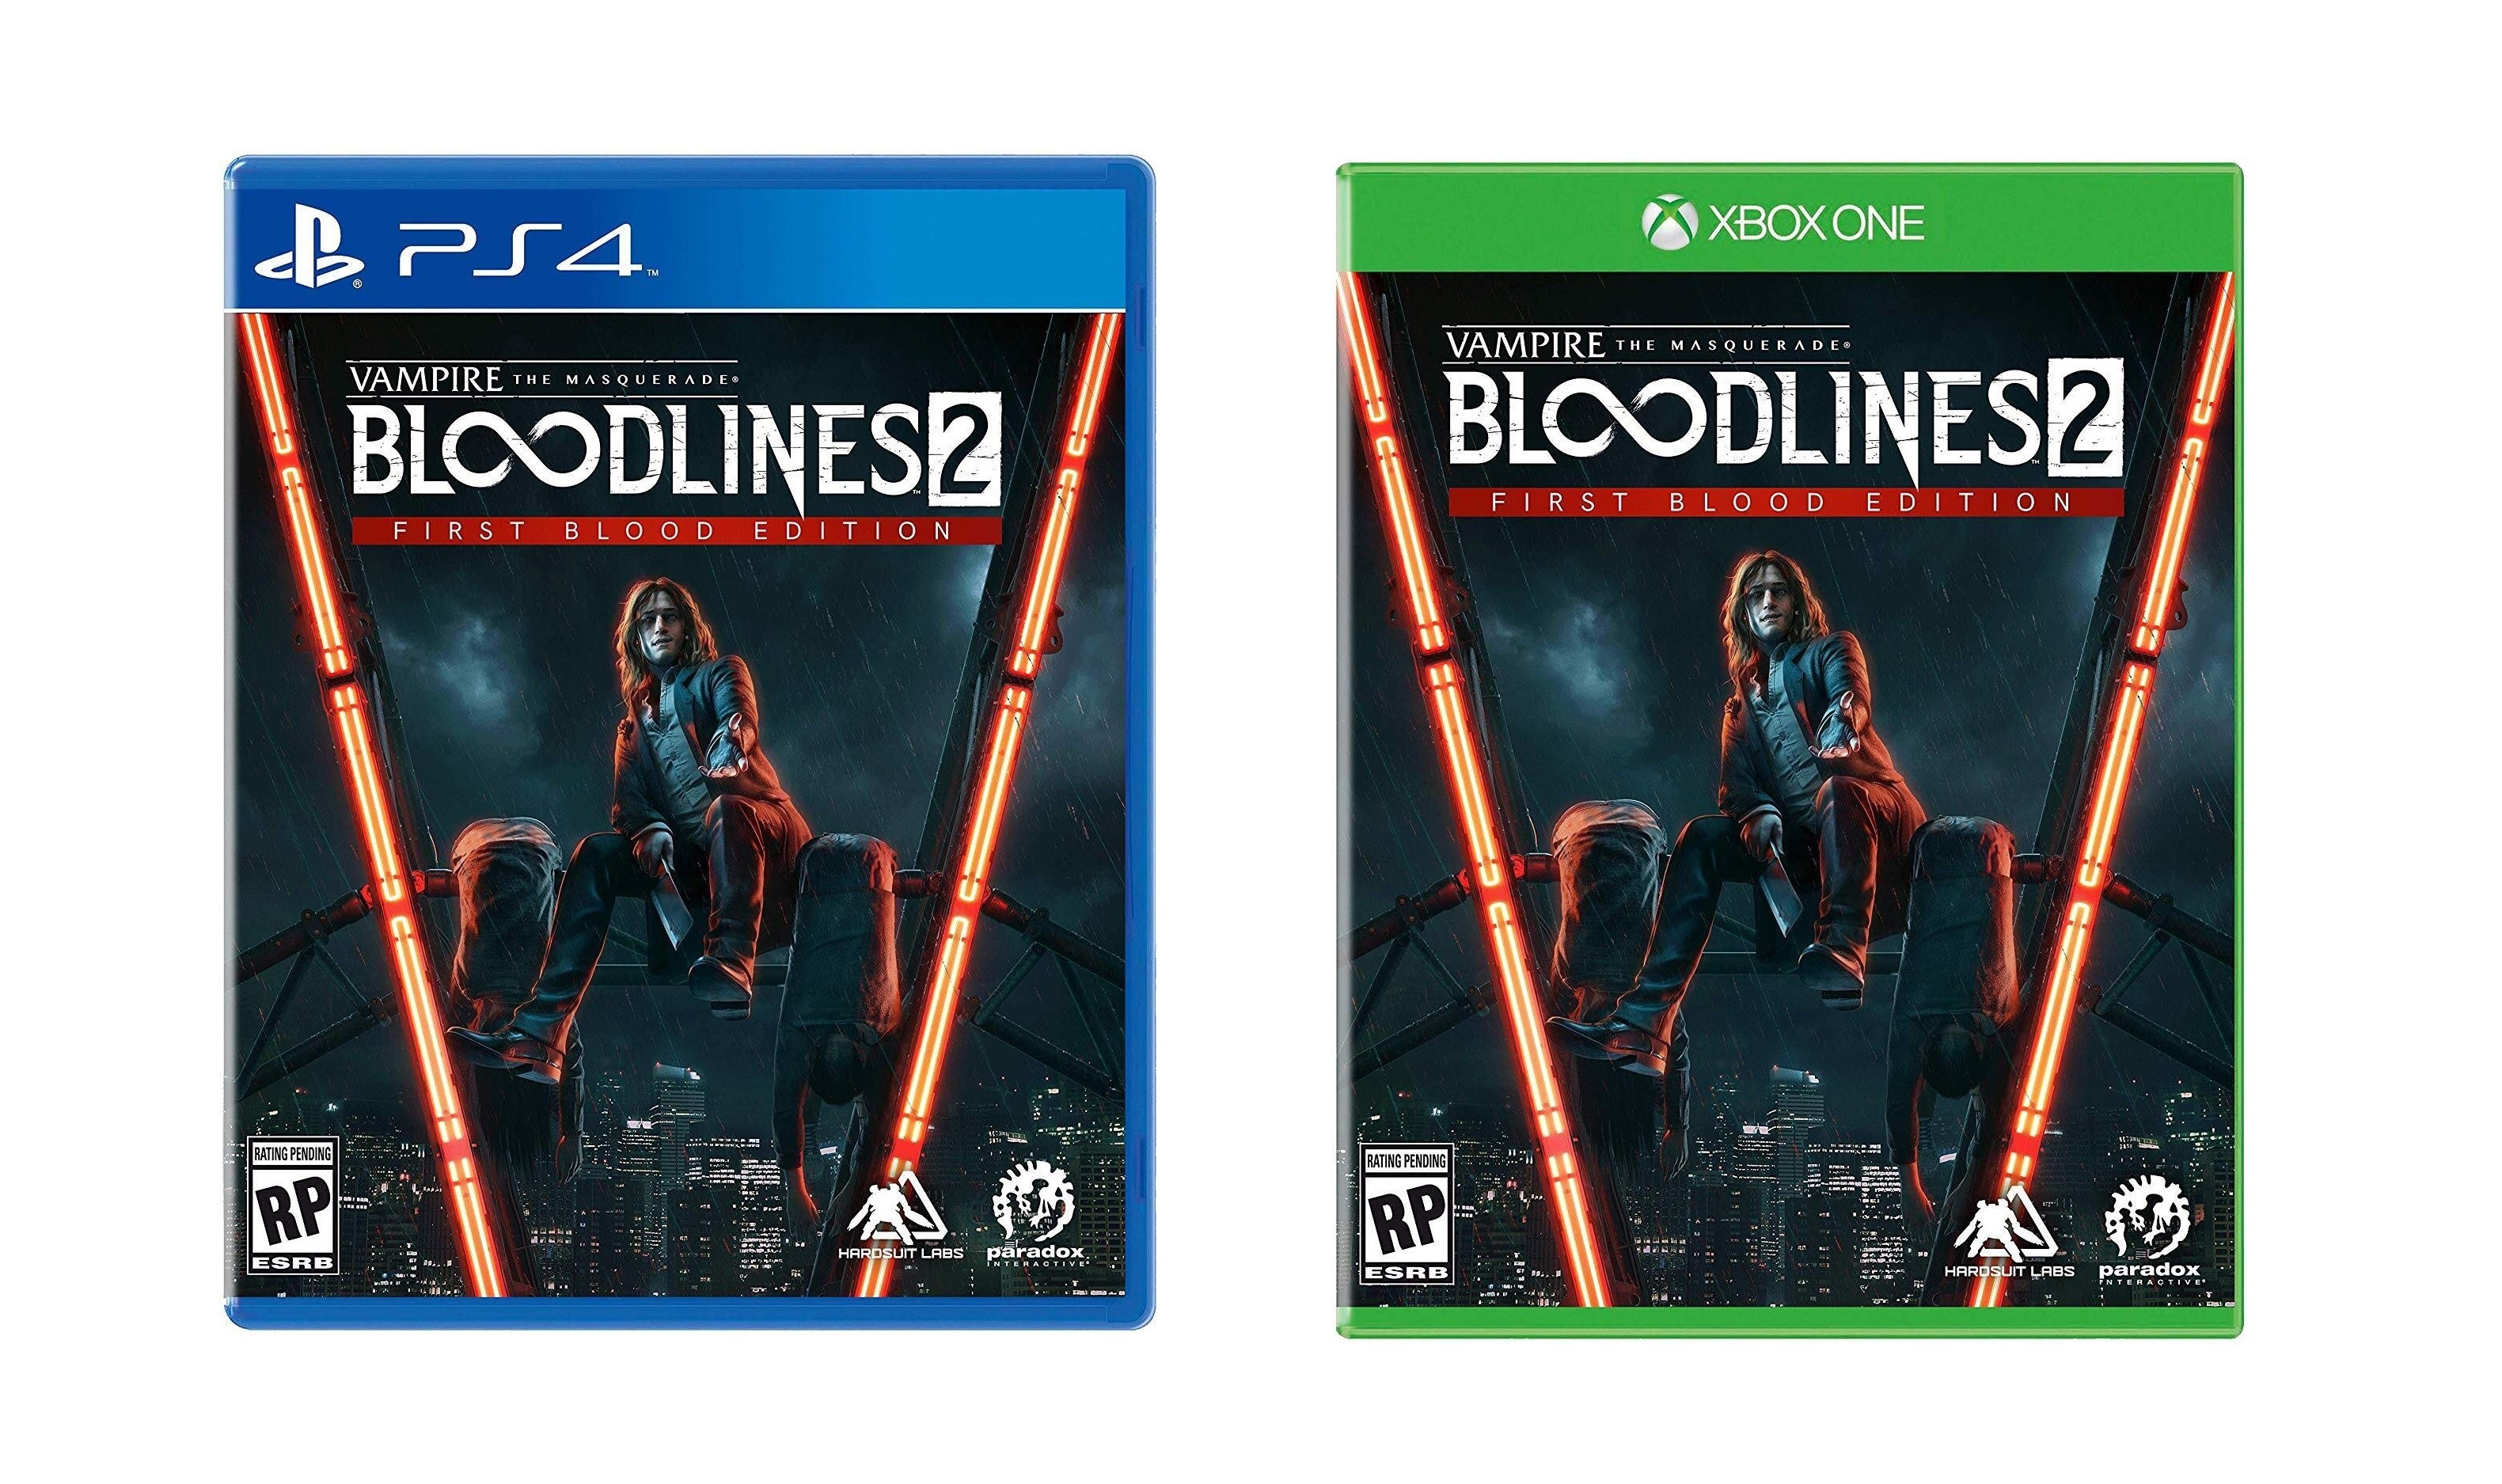 Vampire: The Masquerade - Bloodlines 2 is Coming to Xbox Series X - Xbox  Wire